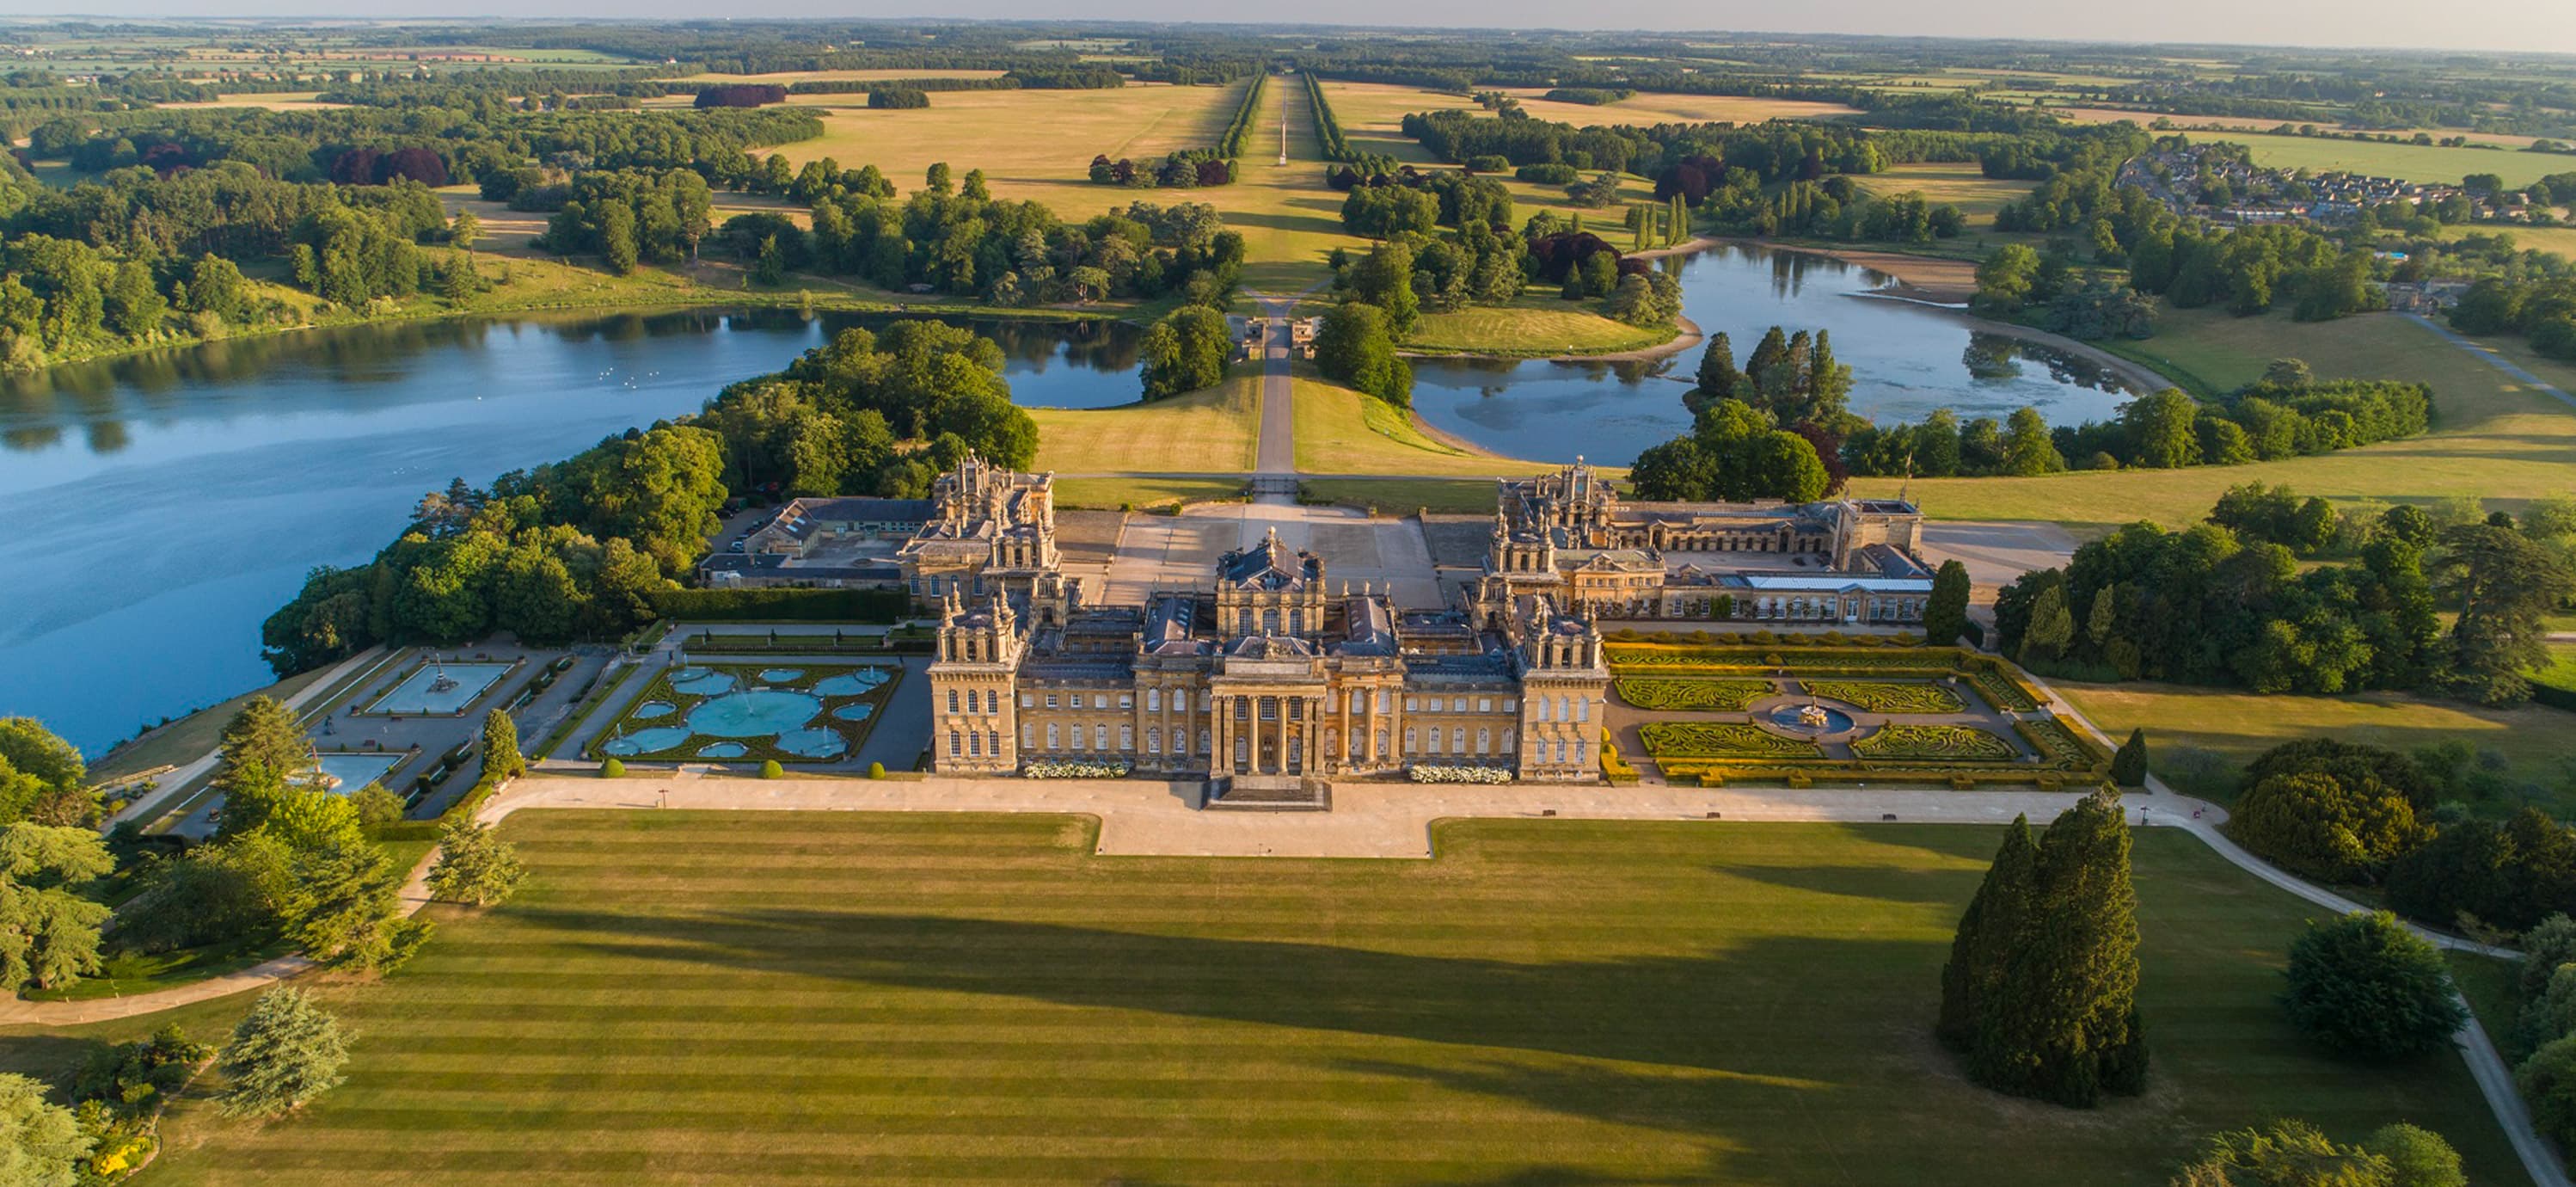 Discover Blenheim with an Annual Pass